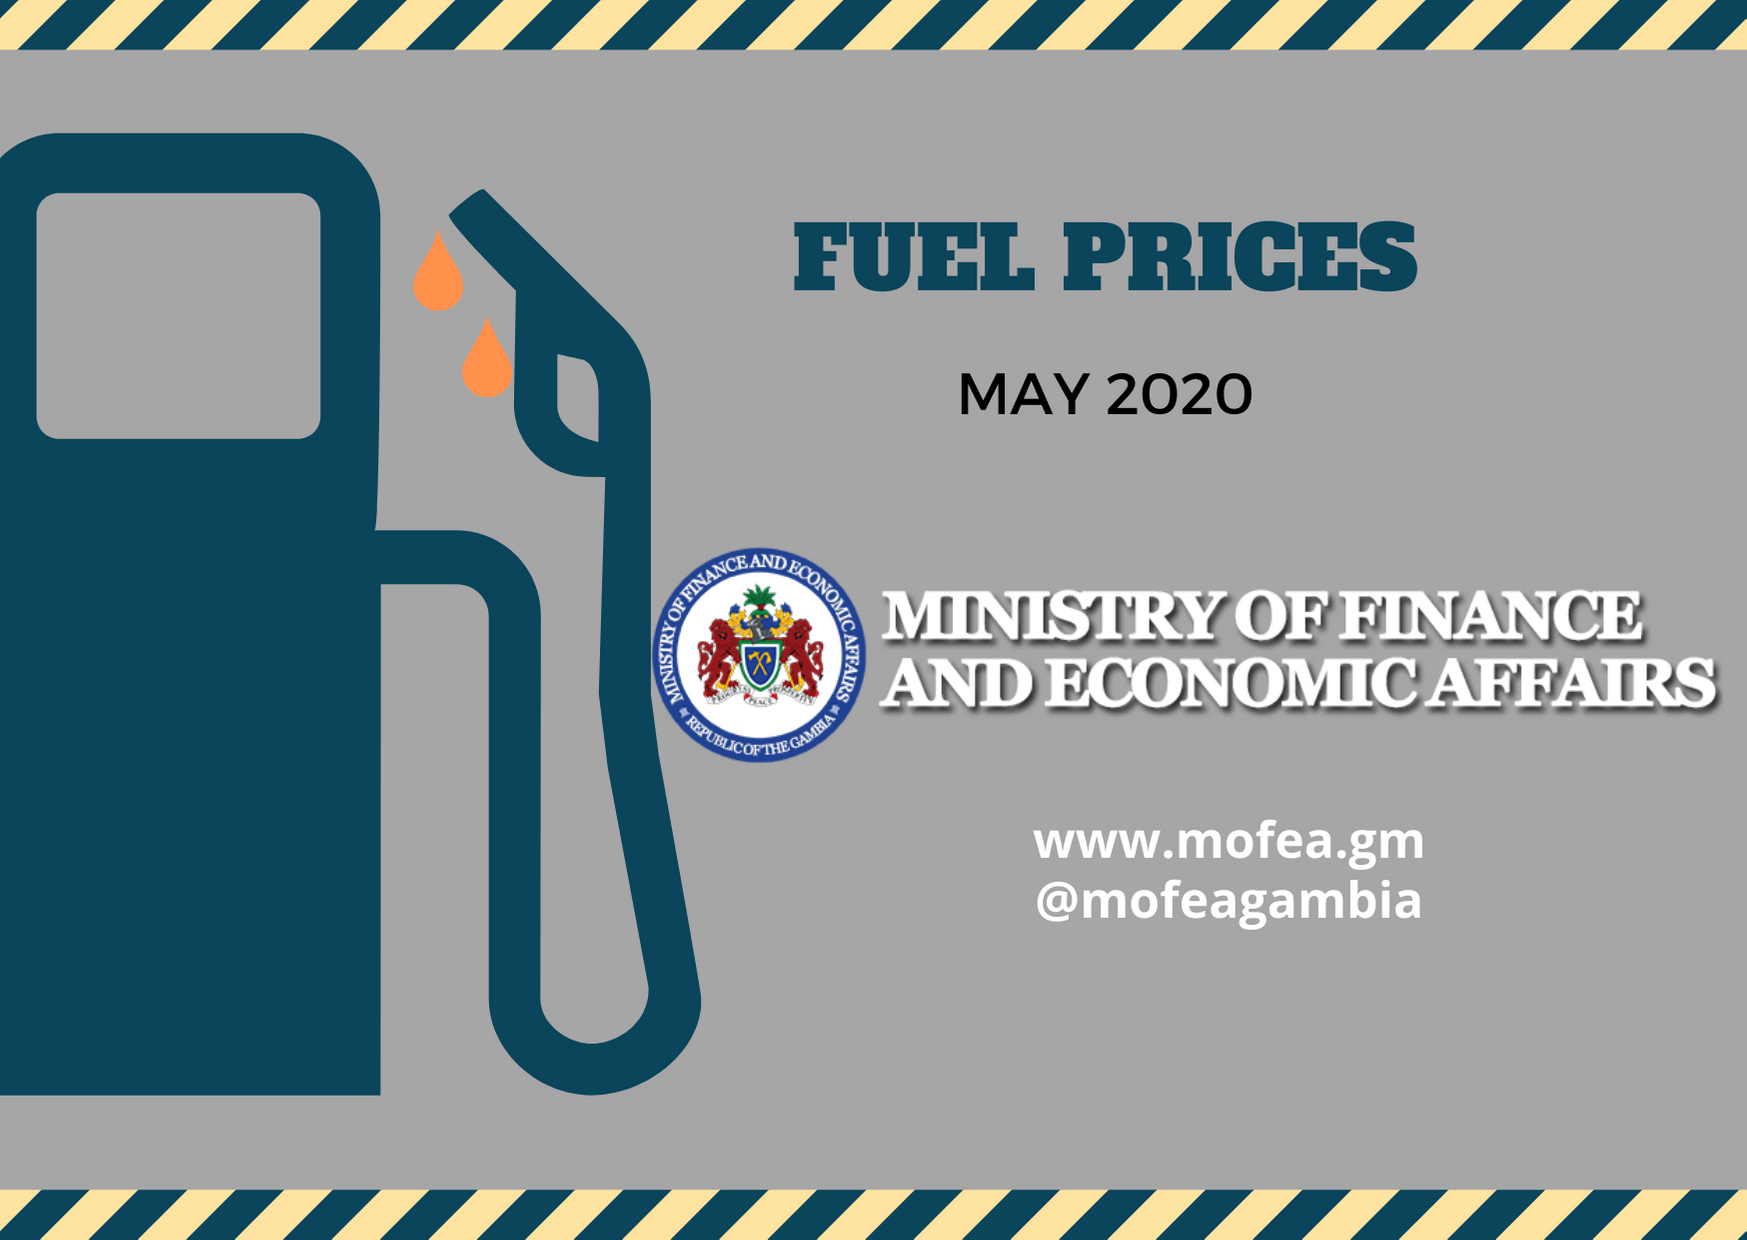 Fuel Prices as of May 2020